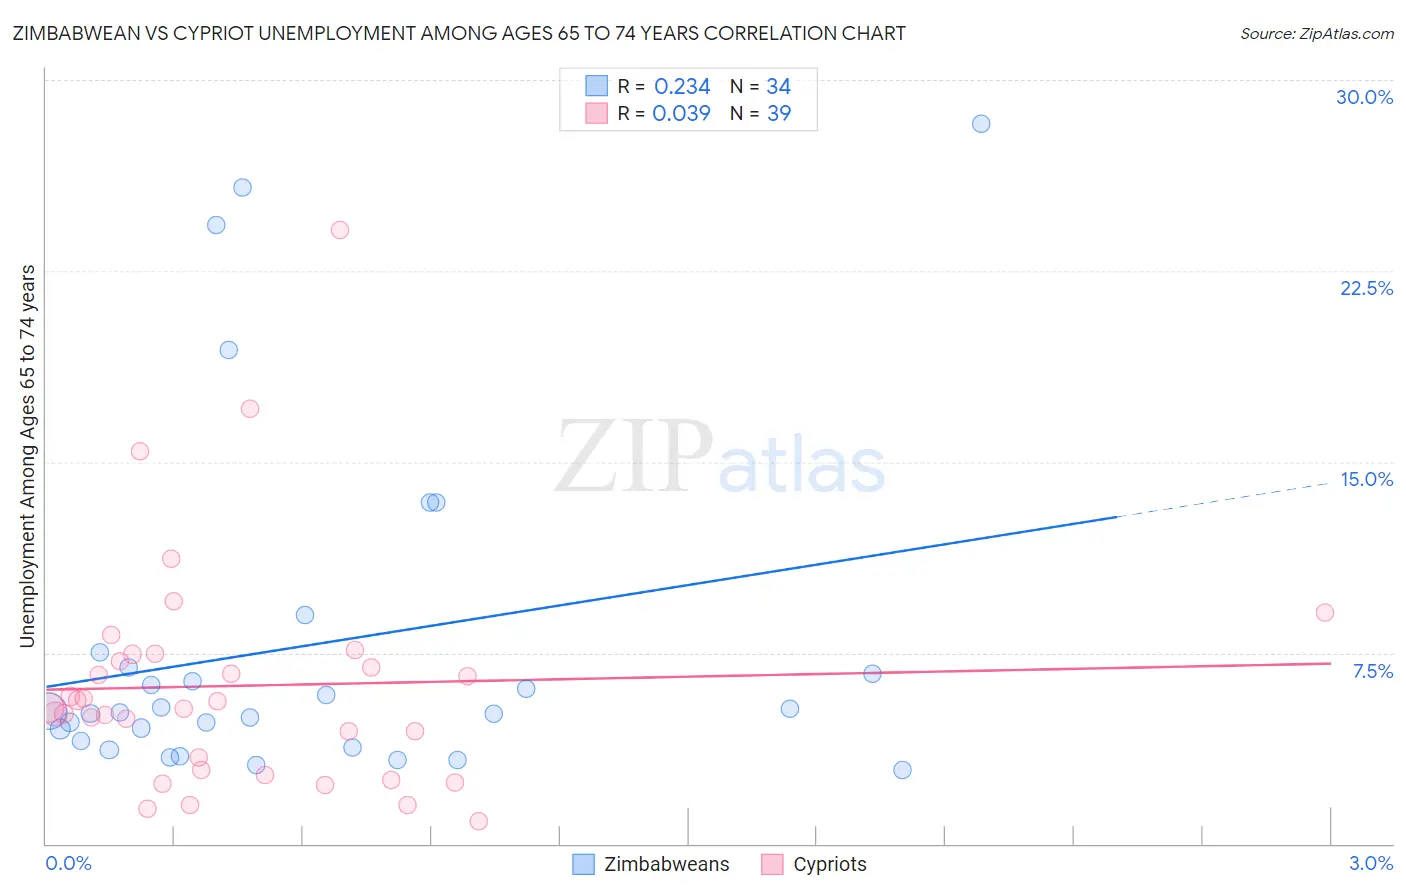 Zimbabwean vs Cypriot Unemployment Among Ages 65 to 74 years